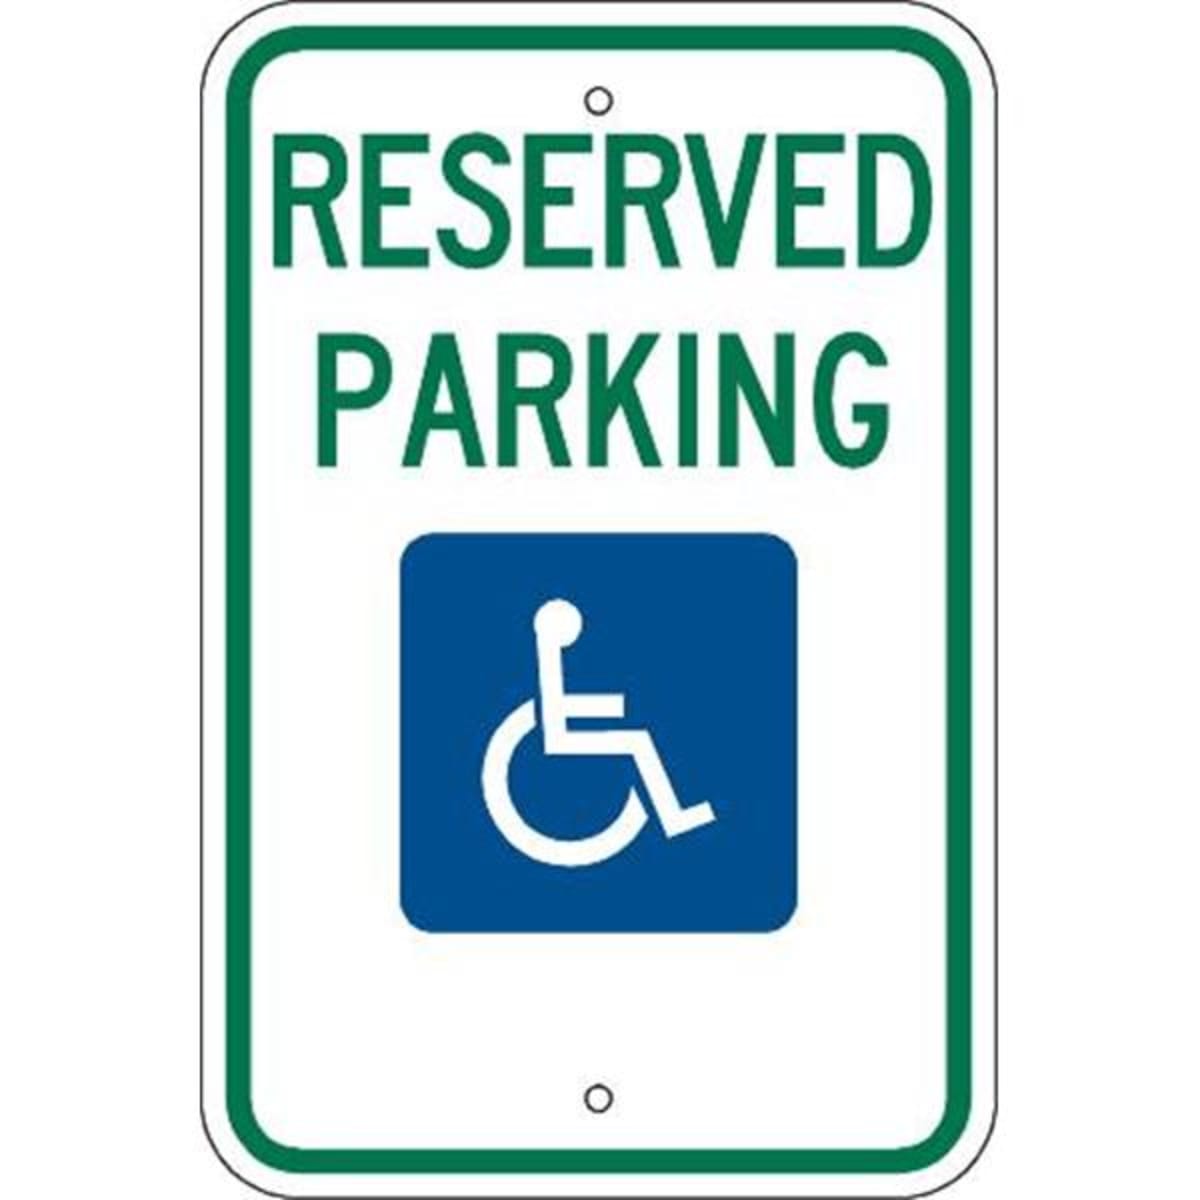 Reserved Parking Handicap Print White and Black Notice Parking Plastic Small Sign 7.5x10.5 Inch 1 Pack of Signs 